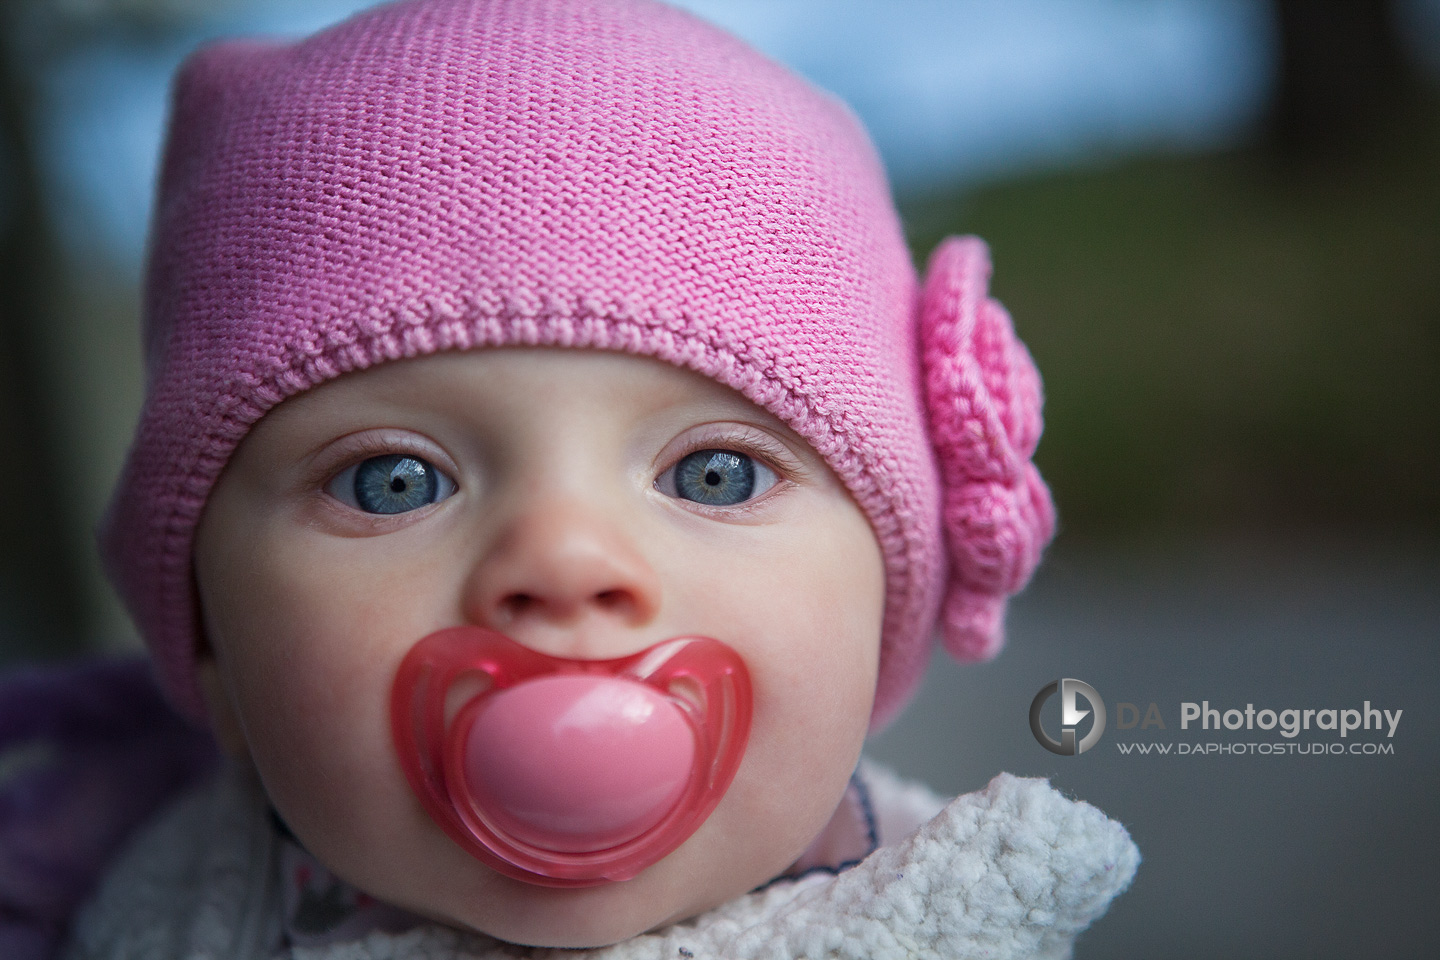 "The pacifier" and the happy look - Children Photographer